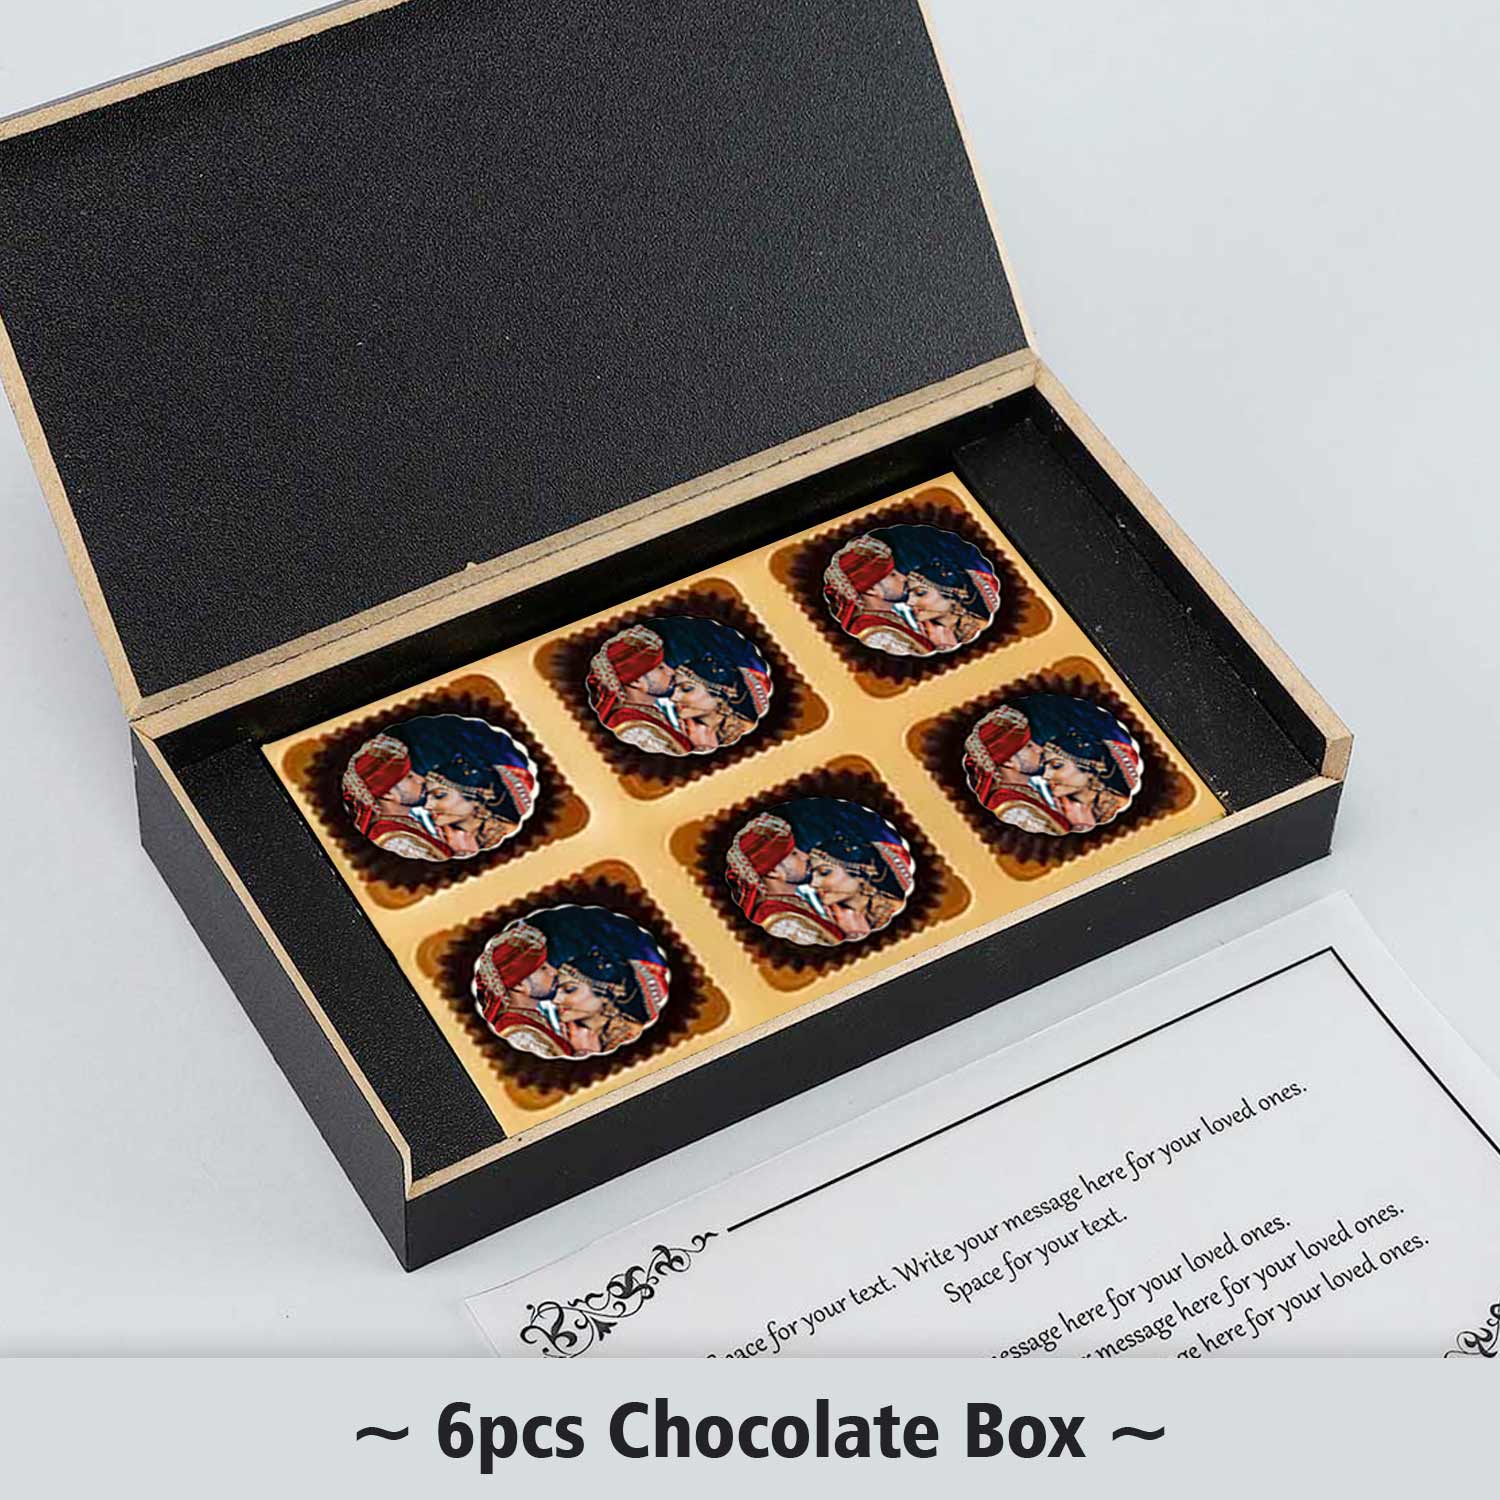 photo printed on chocolates and box with delicate border design